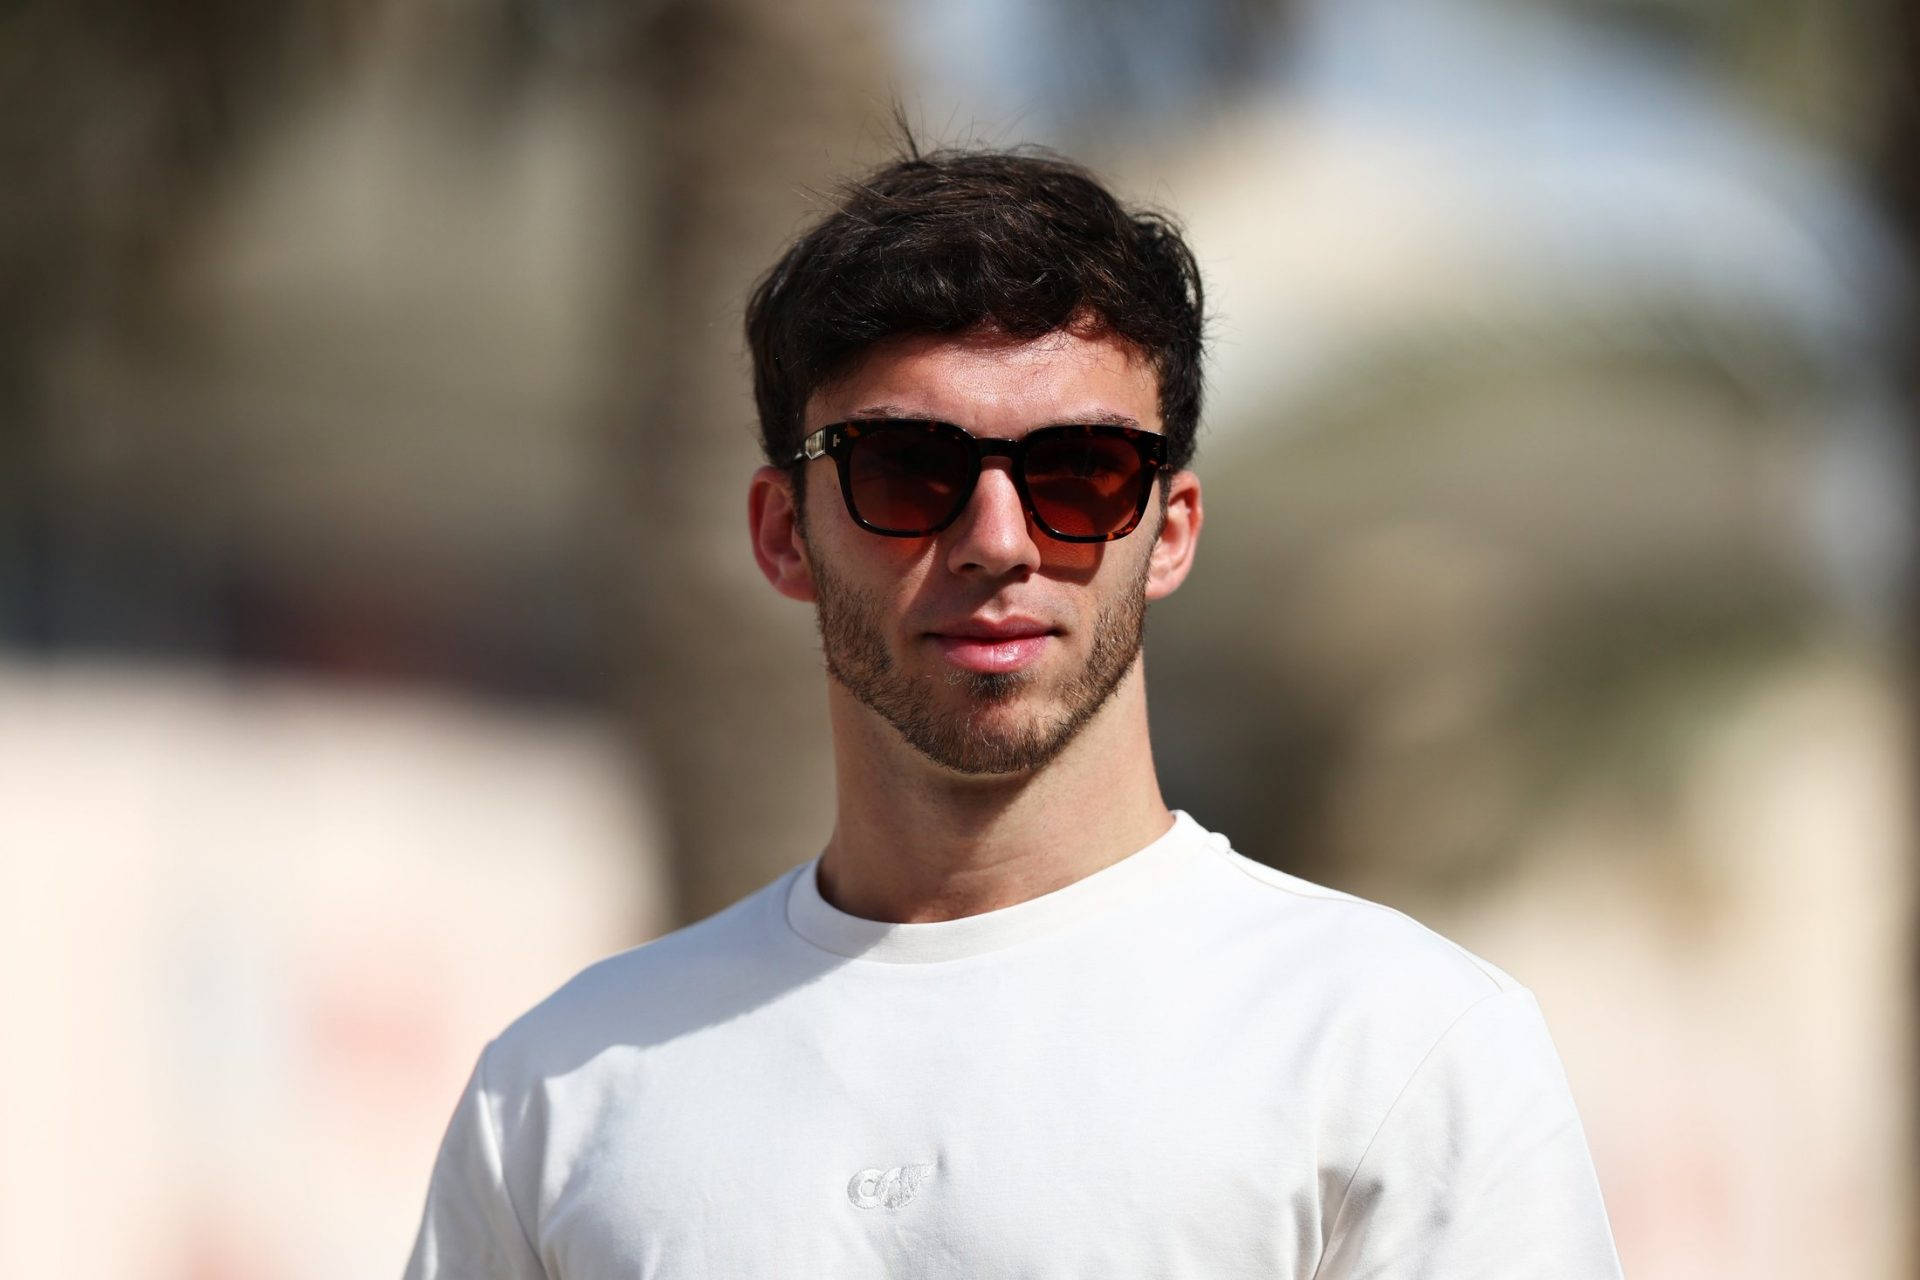 Pierre Gasly exuding confidence in simple white shirt. Wallpaper